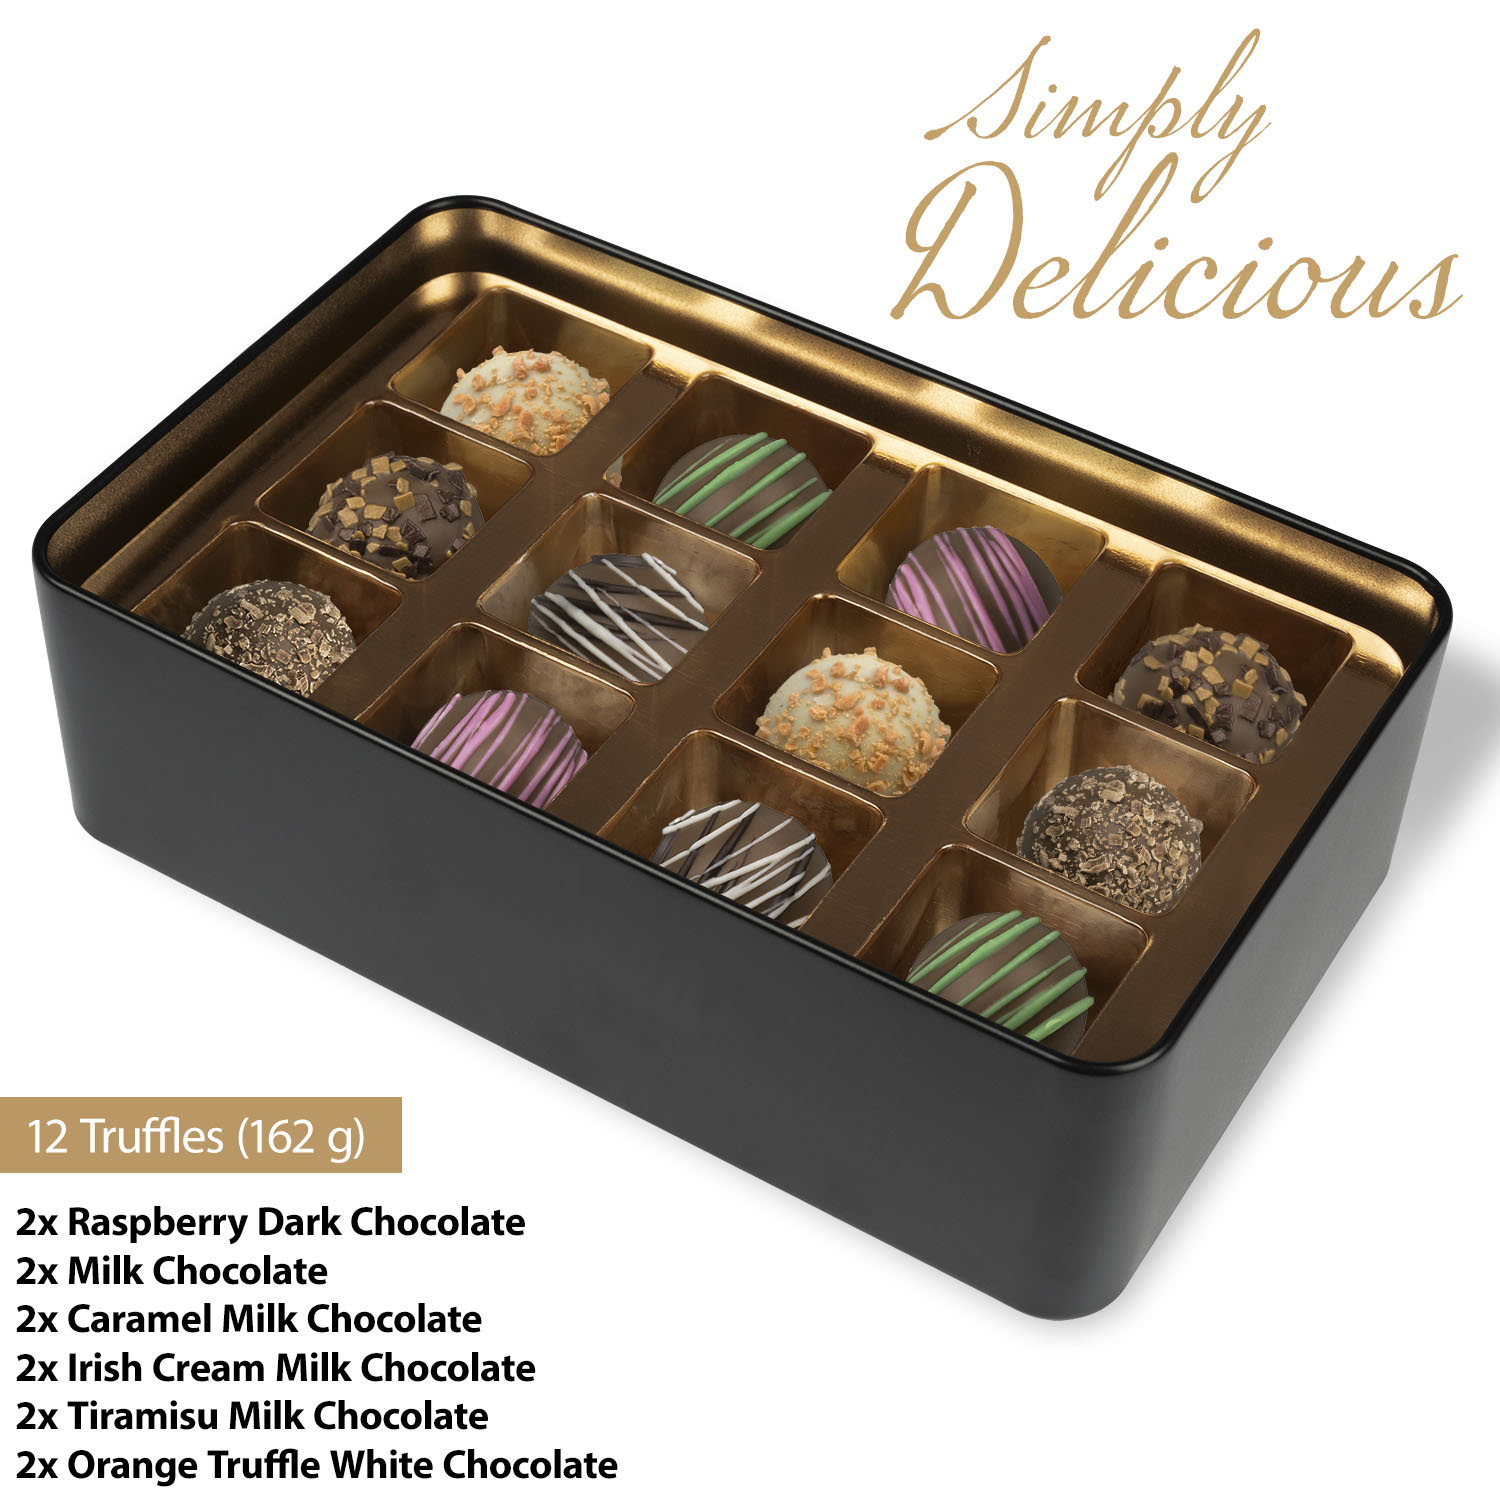 Personalized Chocolates - My Love - Tin Of Truffles With Photo Upload 